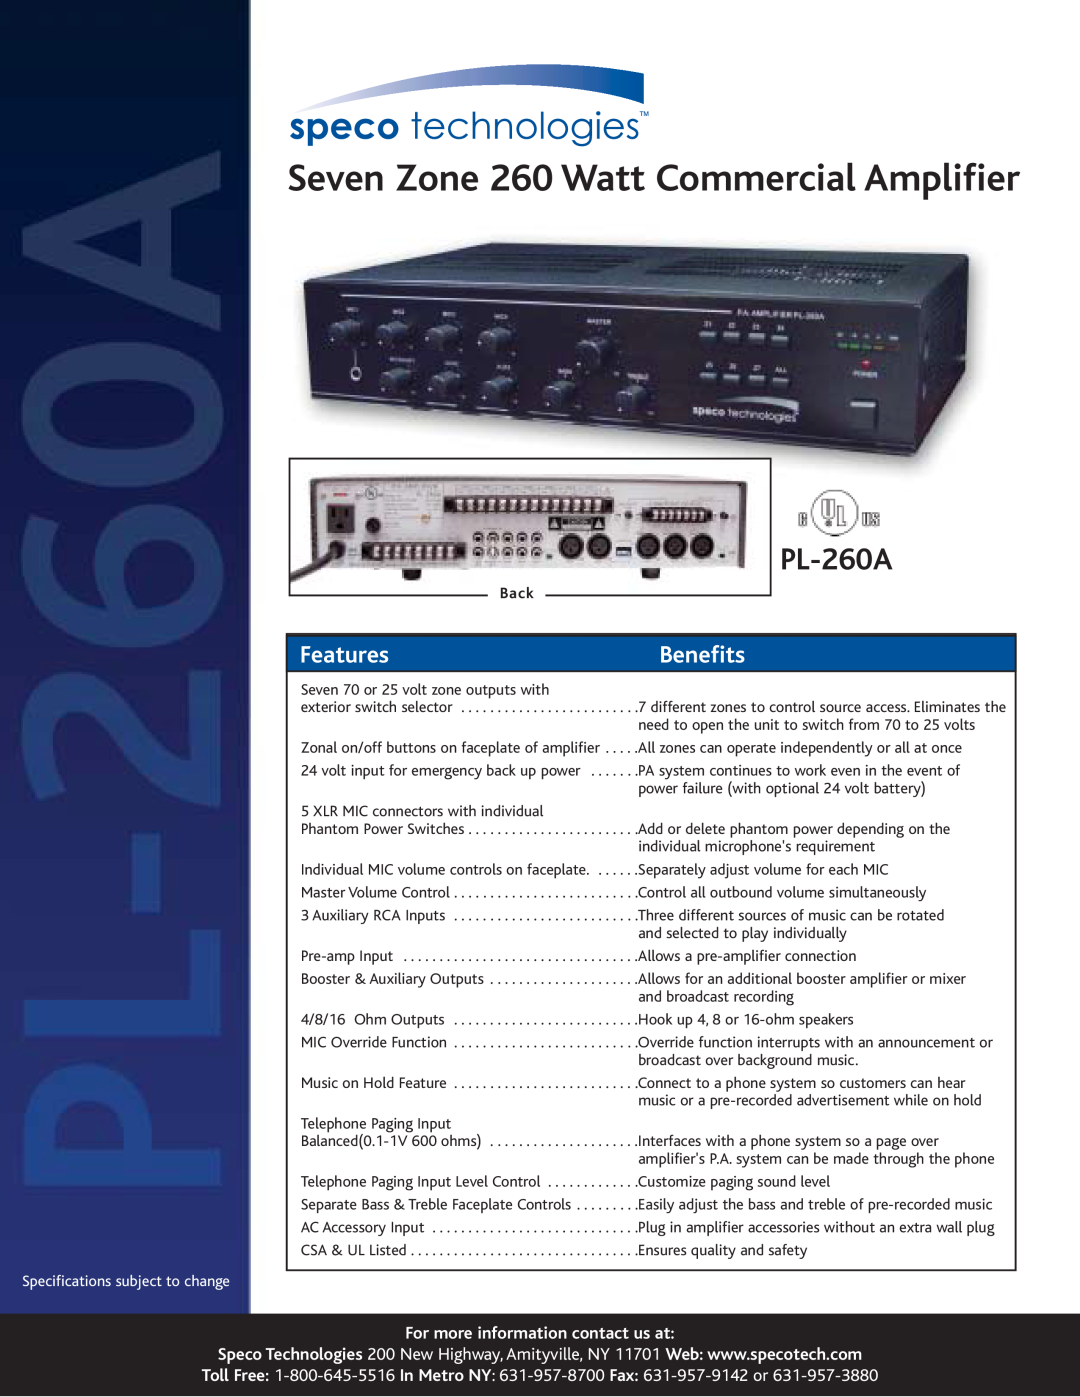 Speco Technologies PL-260A specifications For more information contact us at, Seven Zone 260 Watt Commercial Amplifier 